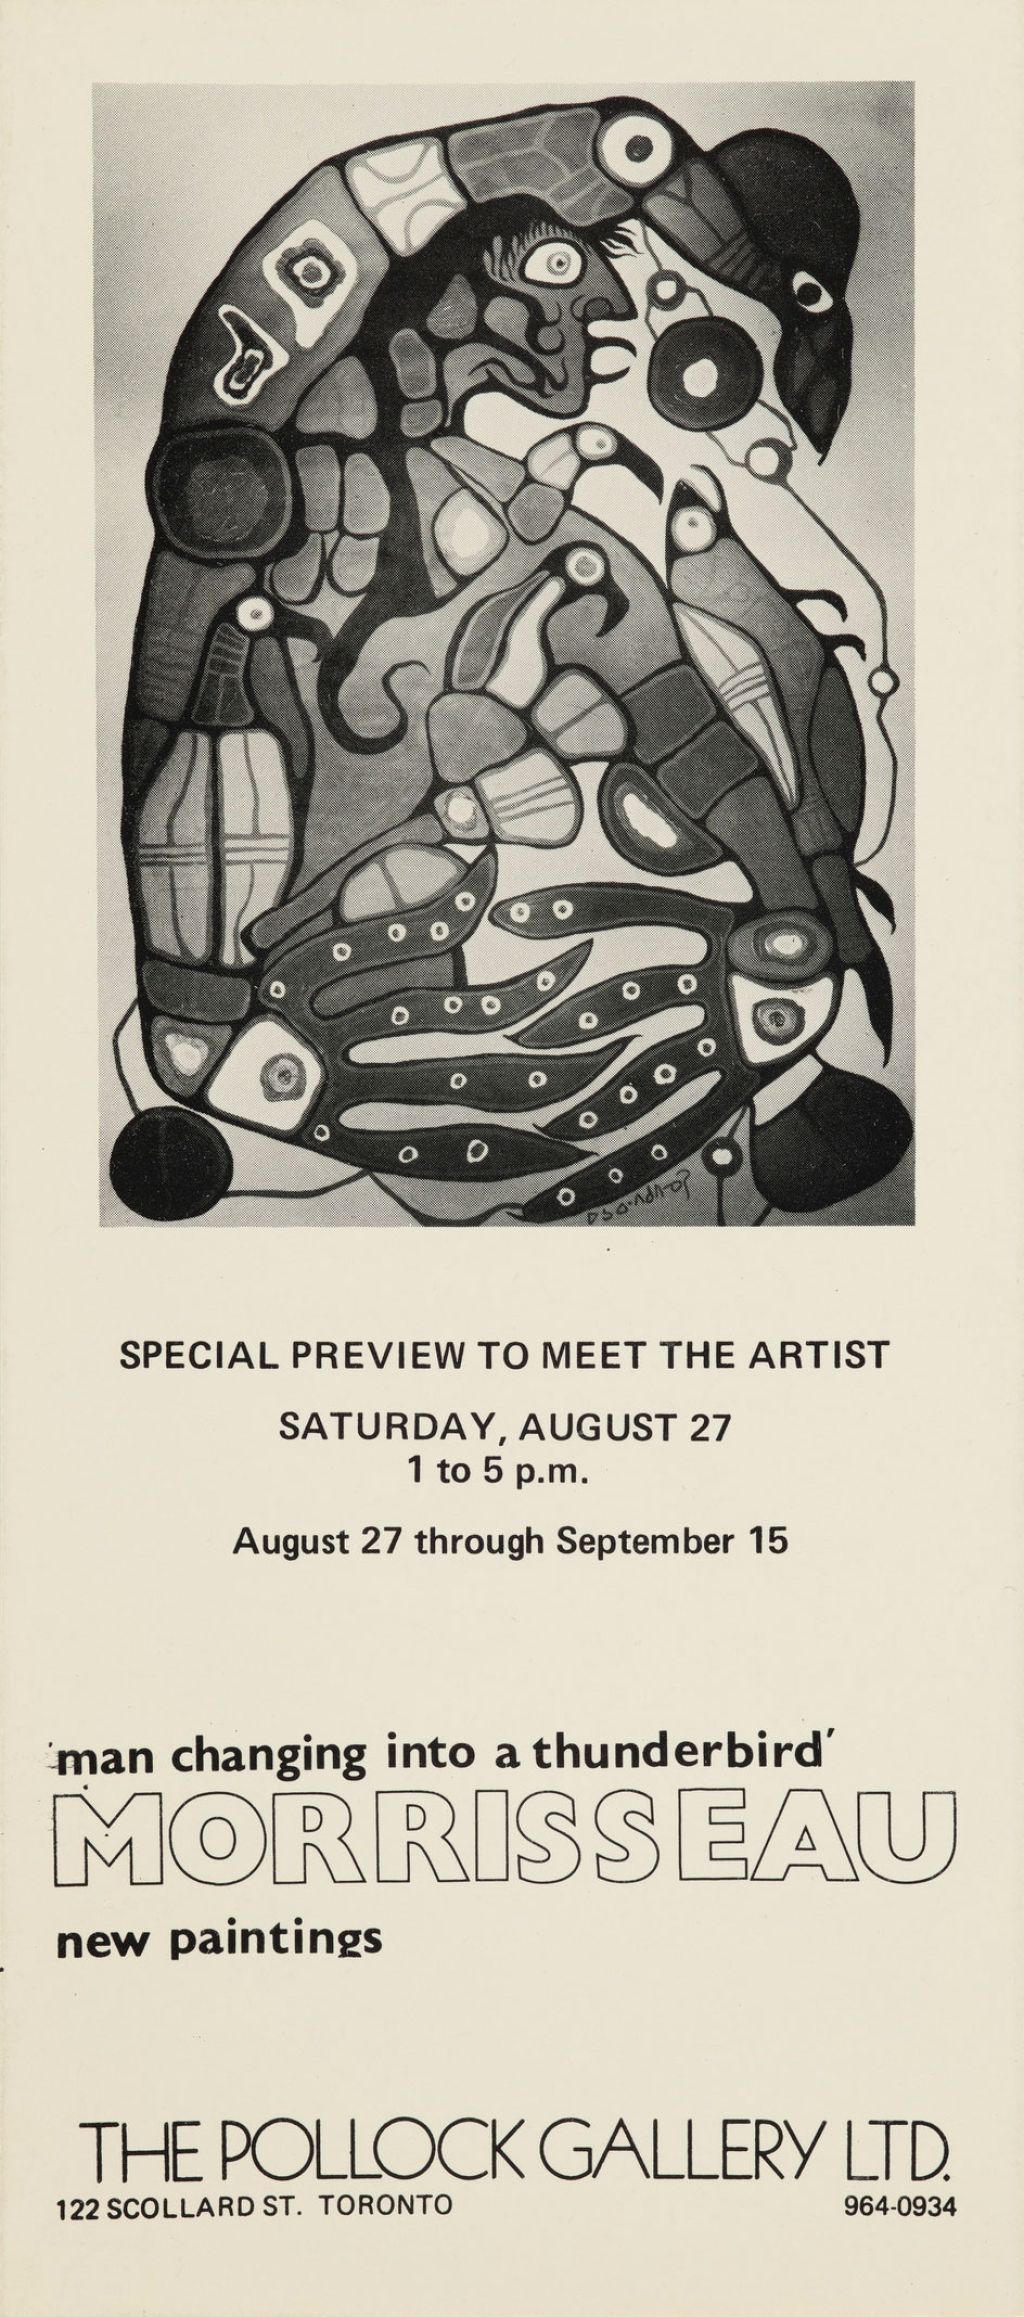 Picture of an exhibition invitation at the Pollock Gallery in 1977